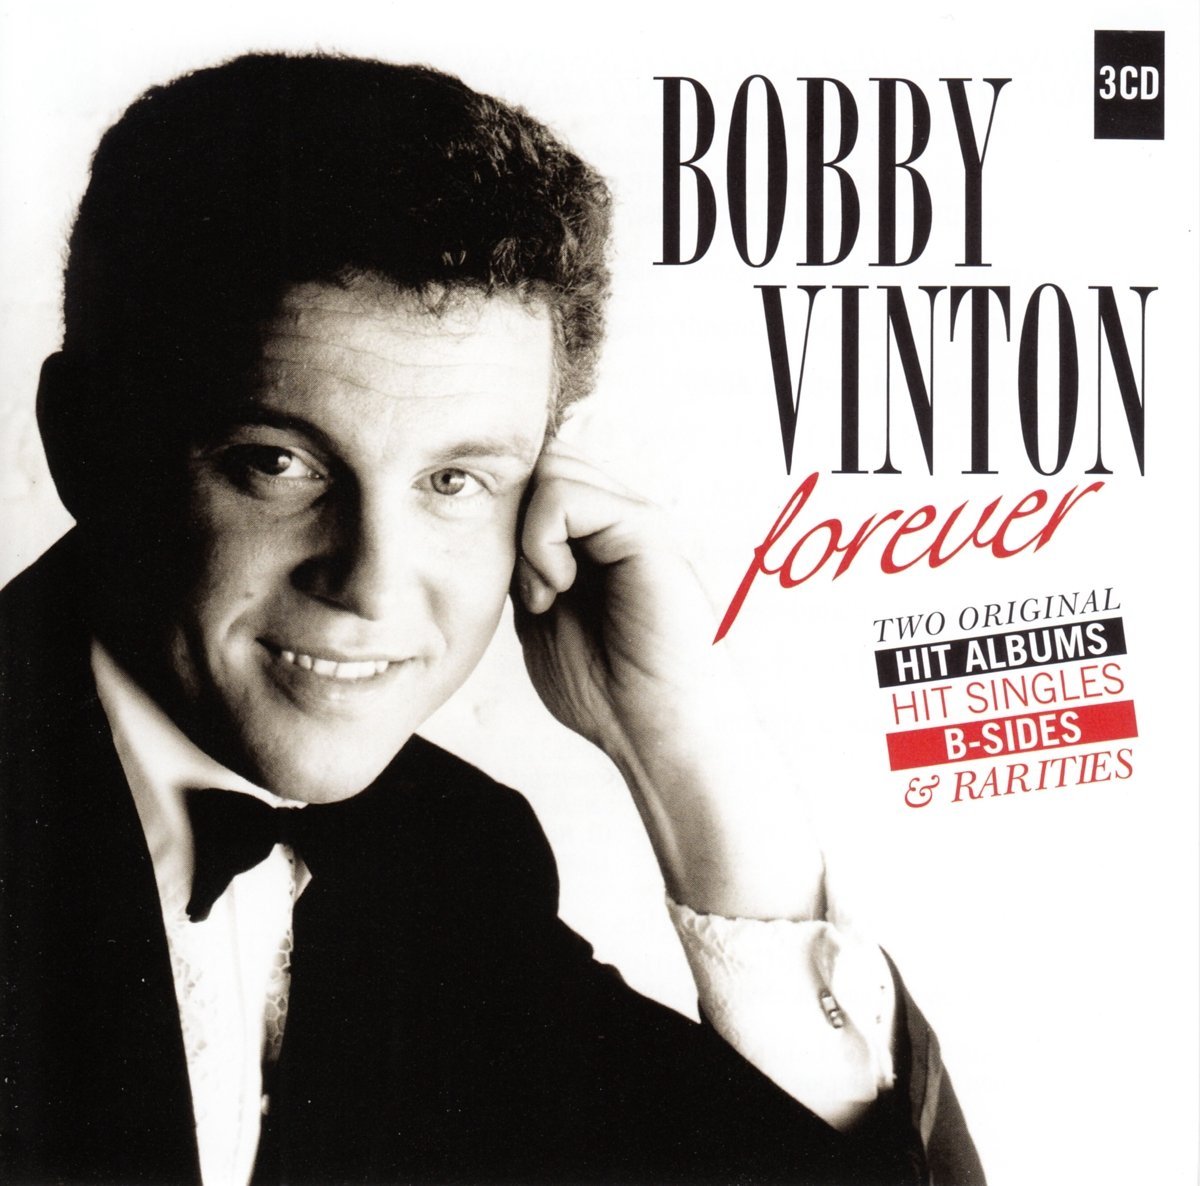 Two forever. Певец Бобби Винтон концерты альбомы обложки. Bobby Vinton. Bobby Vinton ~ there! Ive said it again stereo. Hit Singles a & b Sides.